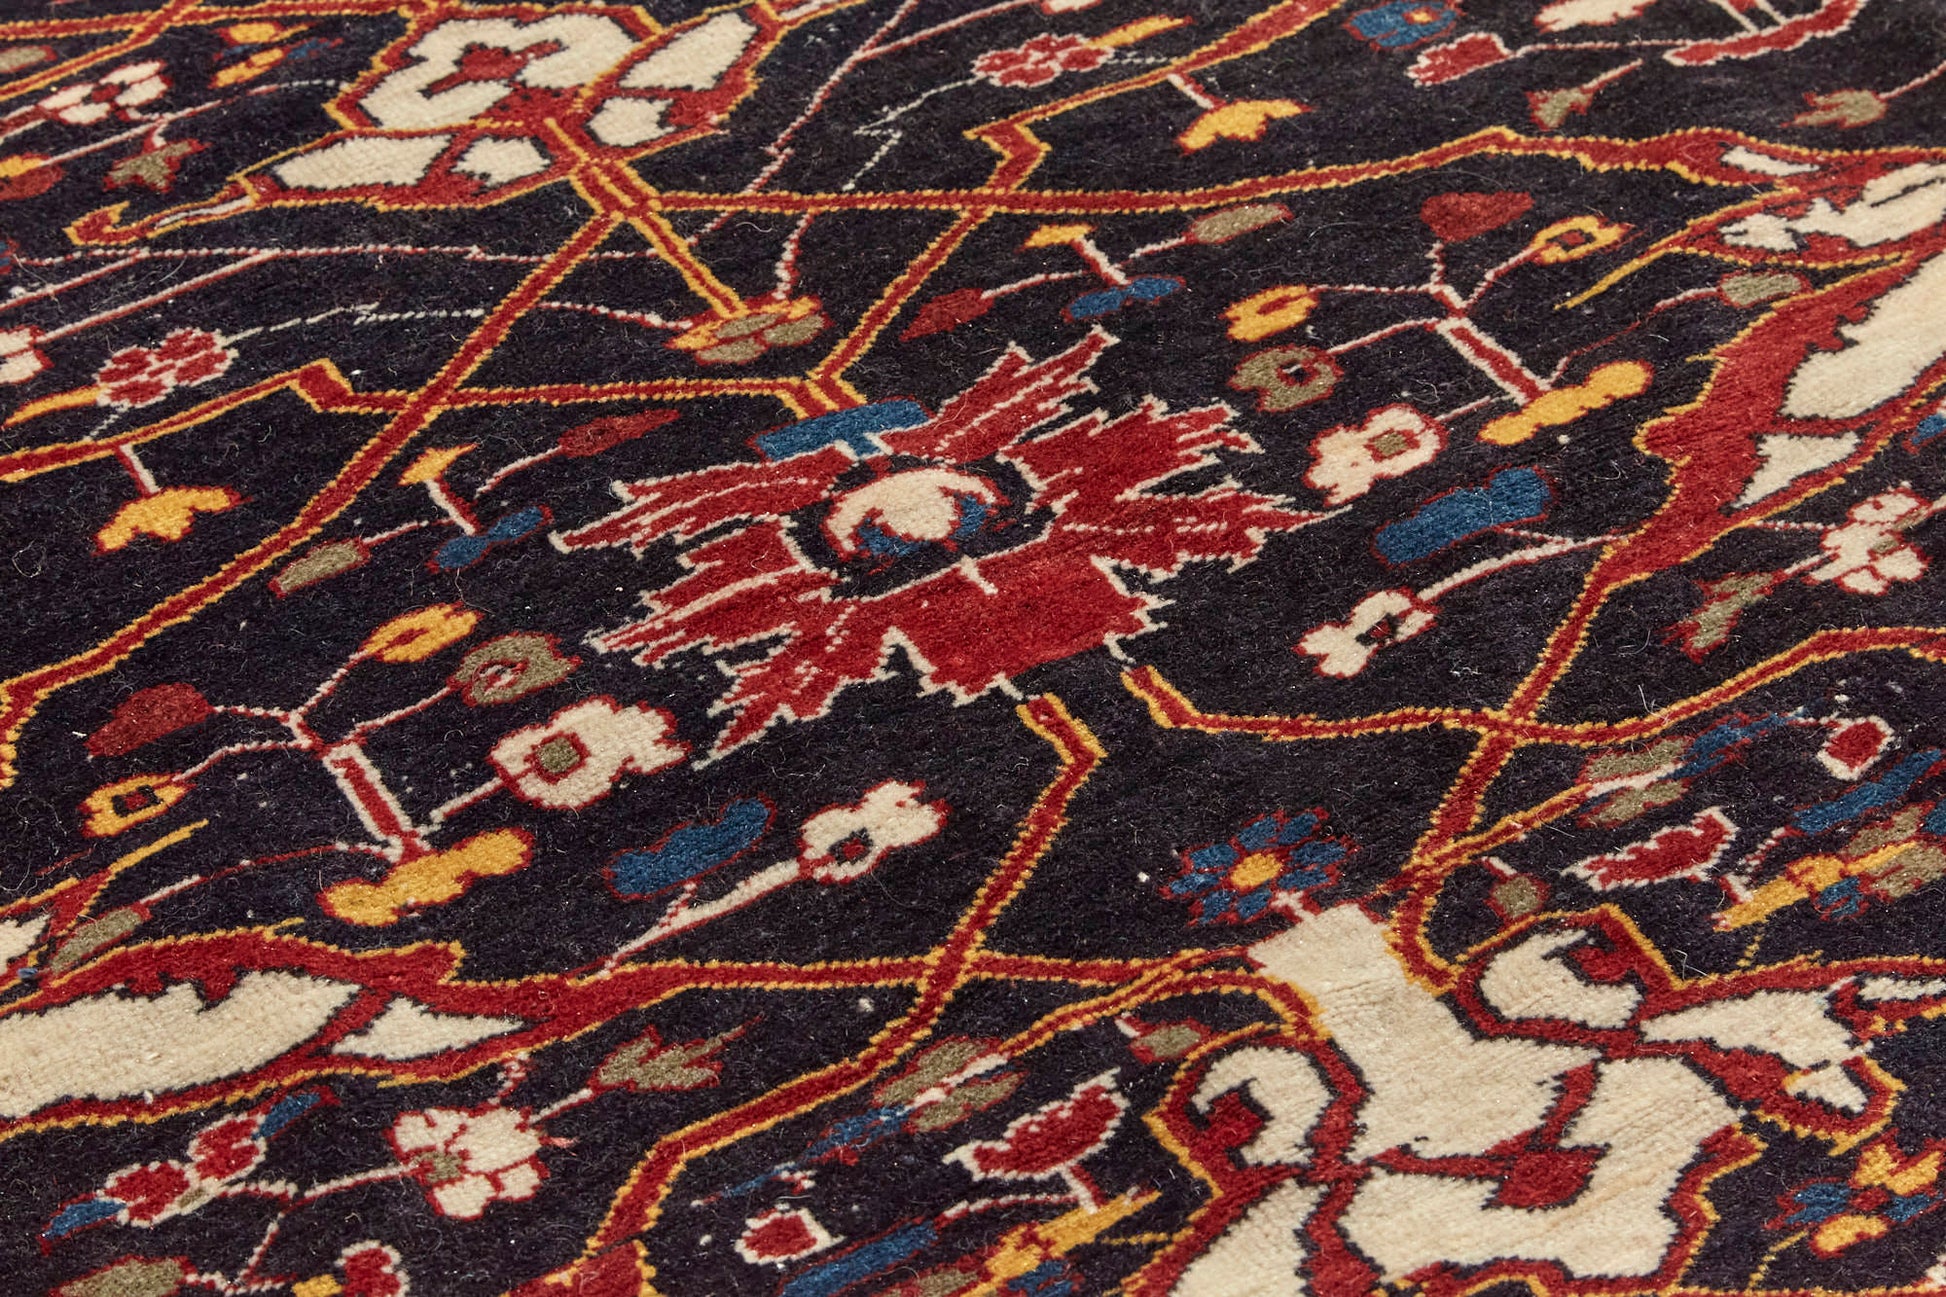 Detail of antique Bidjar Persian Rug Sampler, hand woven with dark blue base and red, cream, gold and lighter blue shapes, beautiful piece in excellent condition for a study, bedroom or foyer rug - Available from King Kennedy Rugs Los Angeles